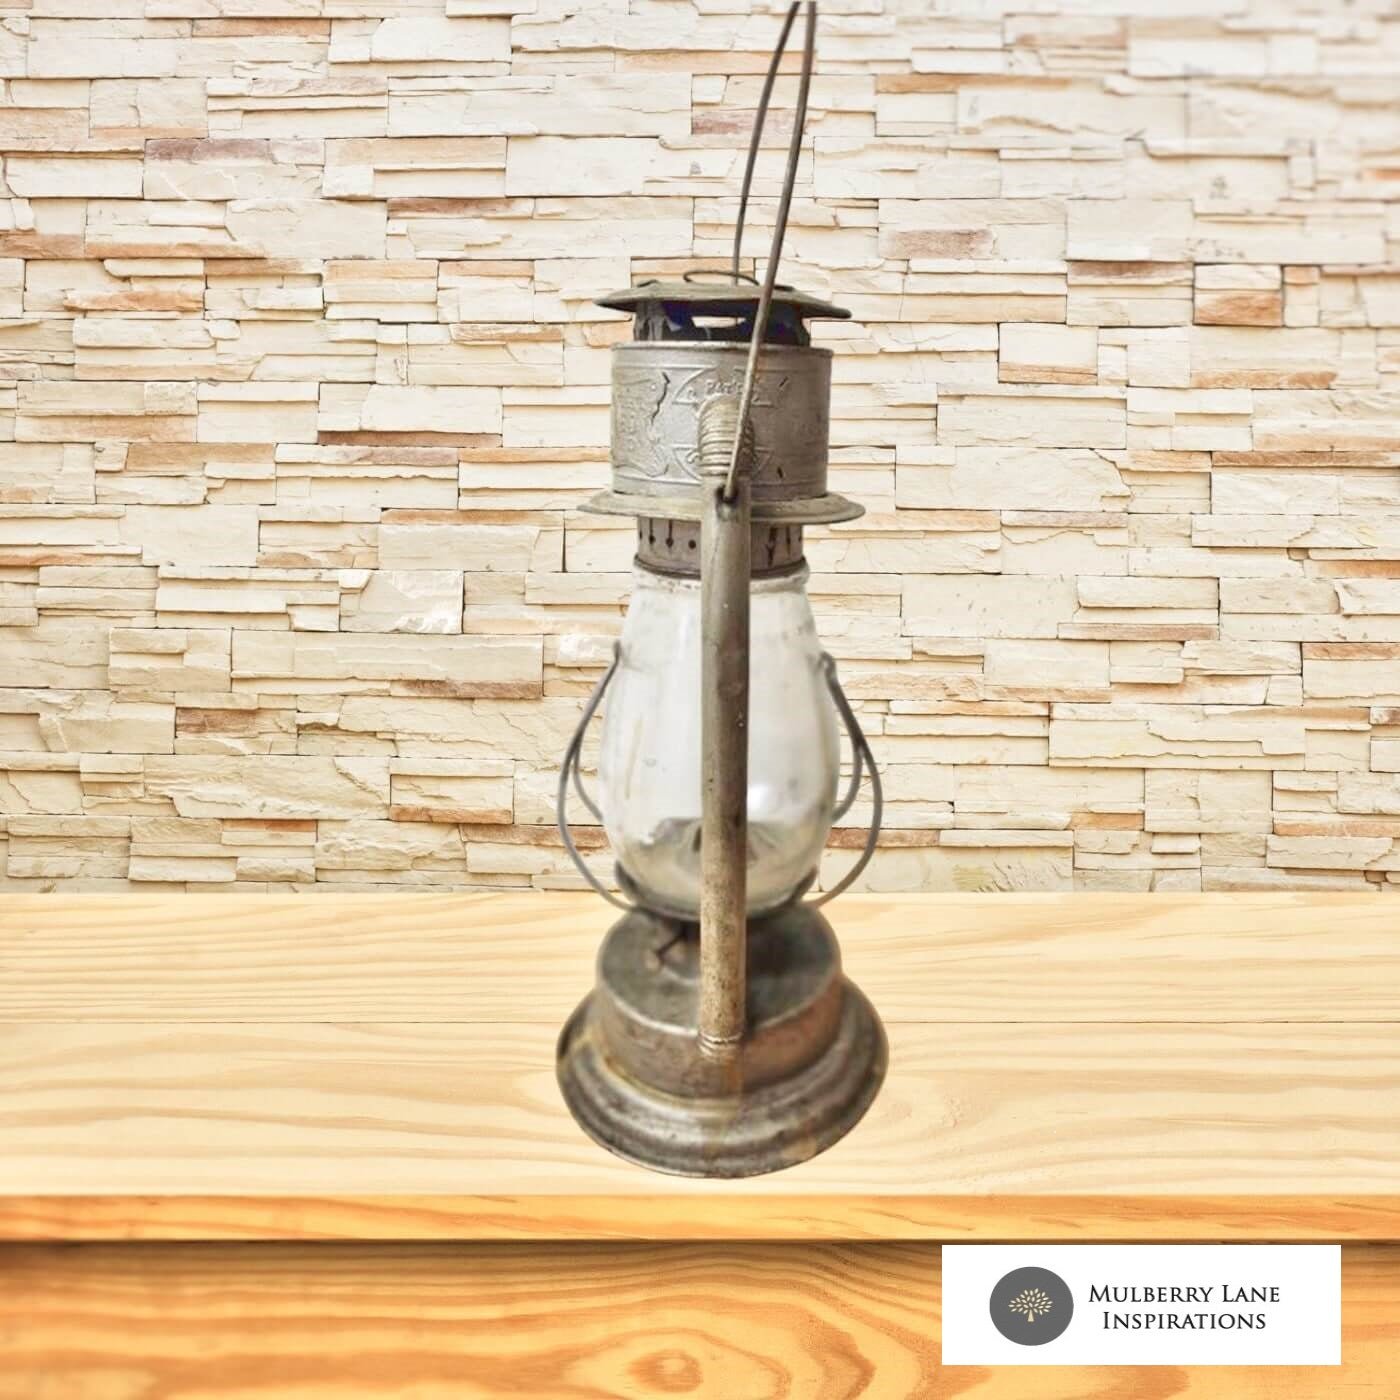 An antique lantern sits on a rustic wooden table, emanating a warm glow in a dimly lit room.